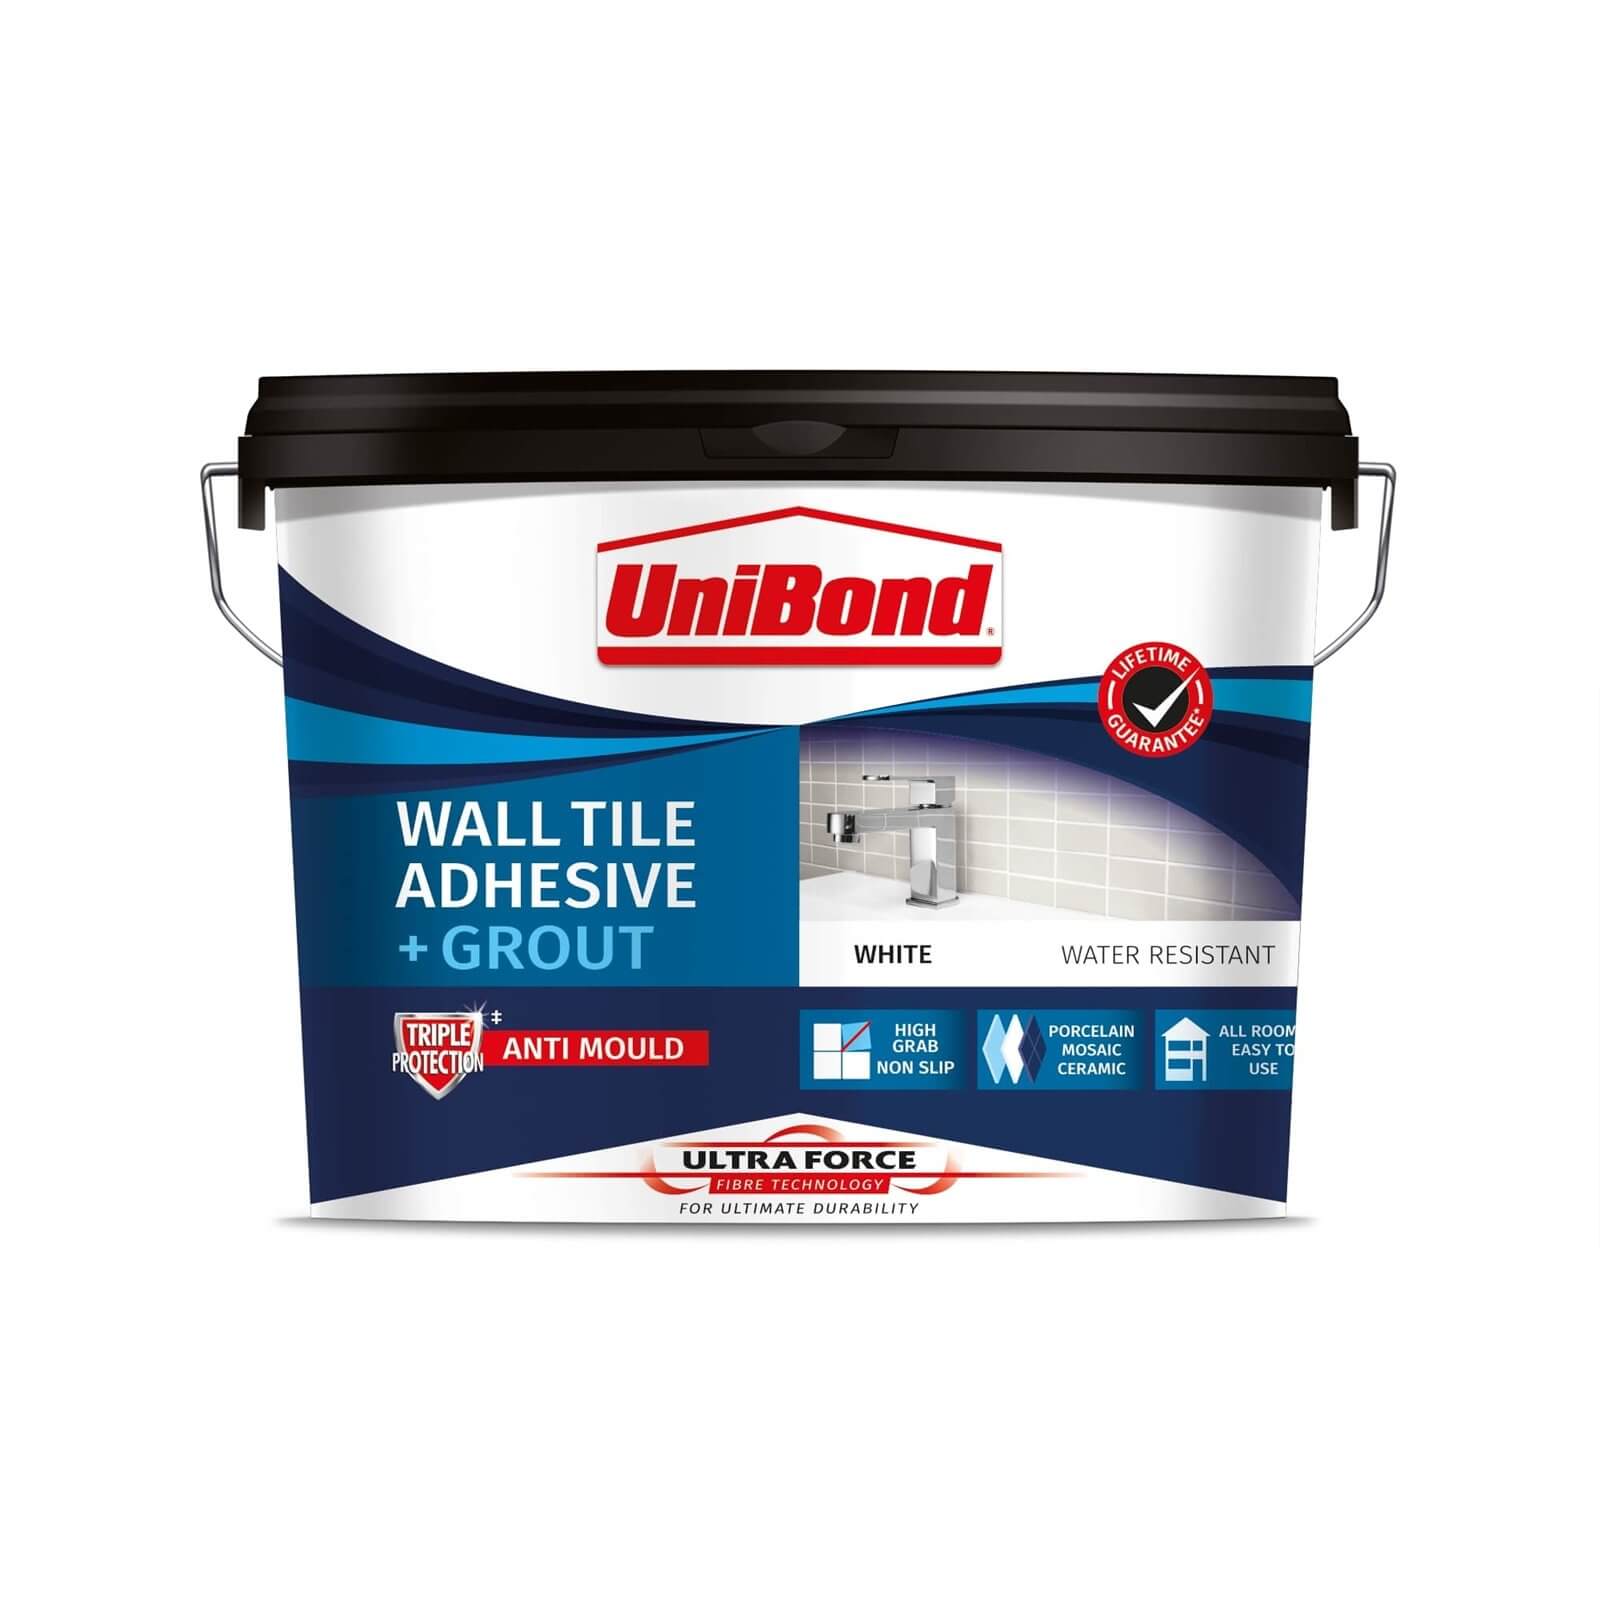 UniBond UltraForce Wall Tile Adhesive & Grout White 12.8kg